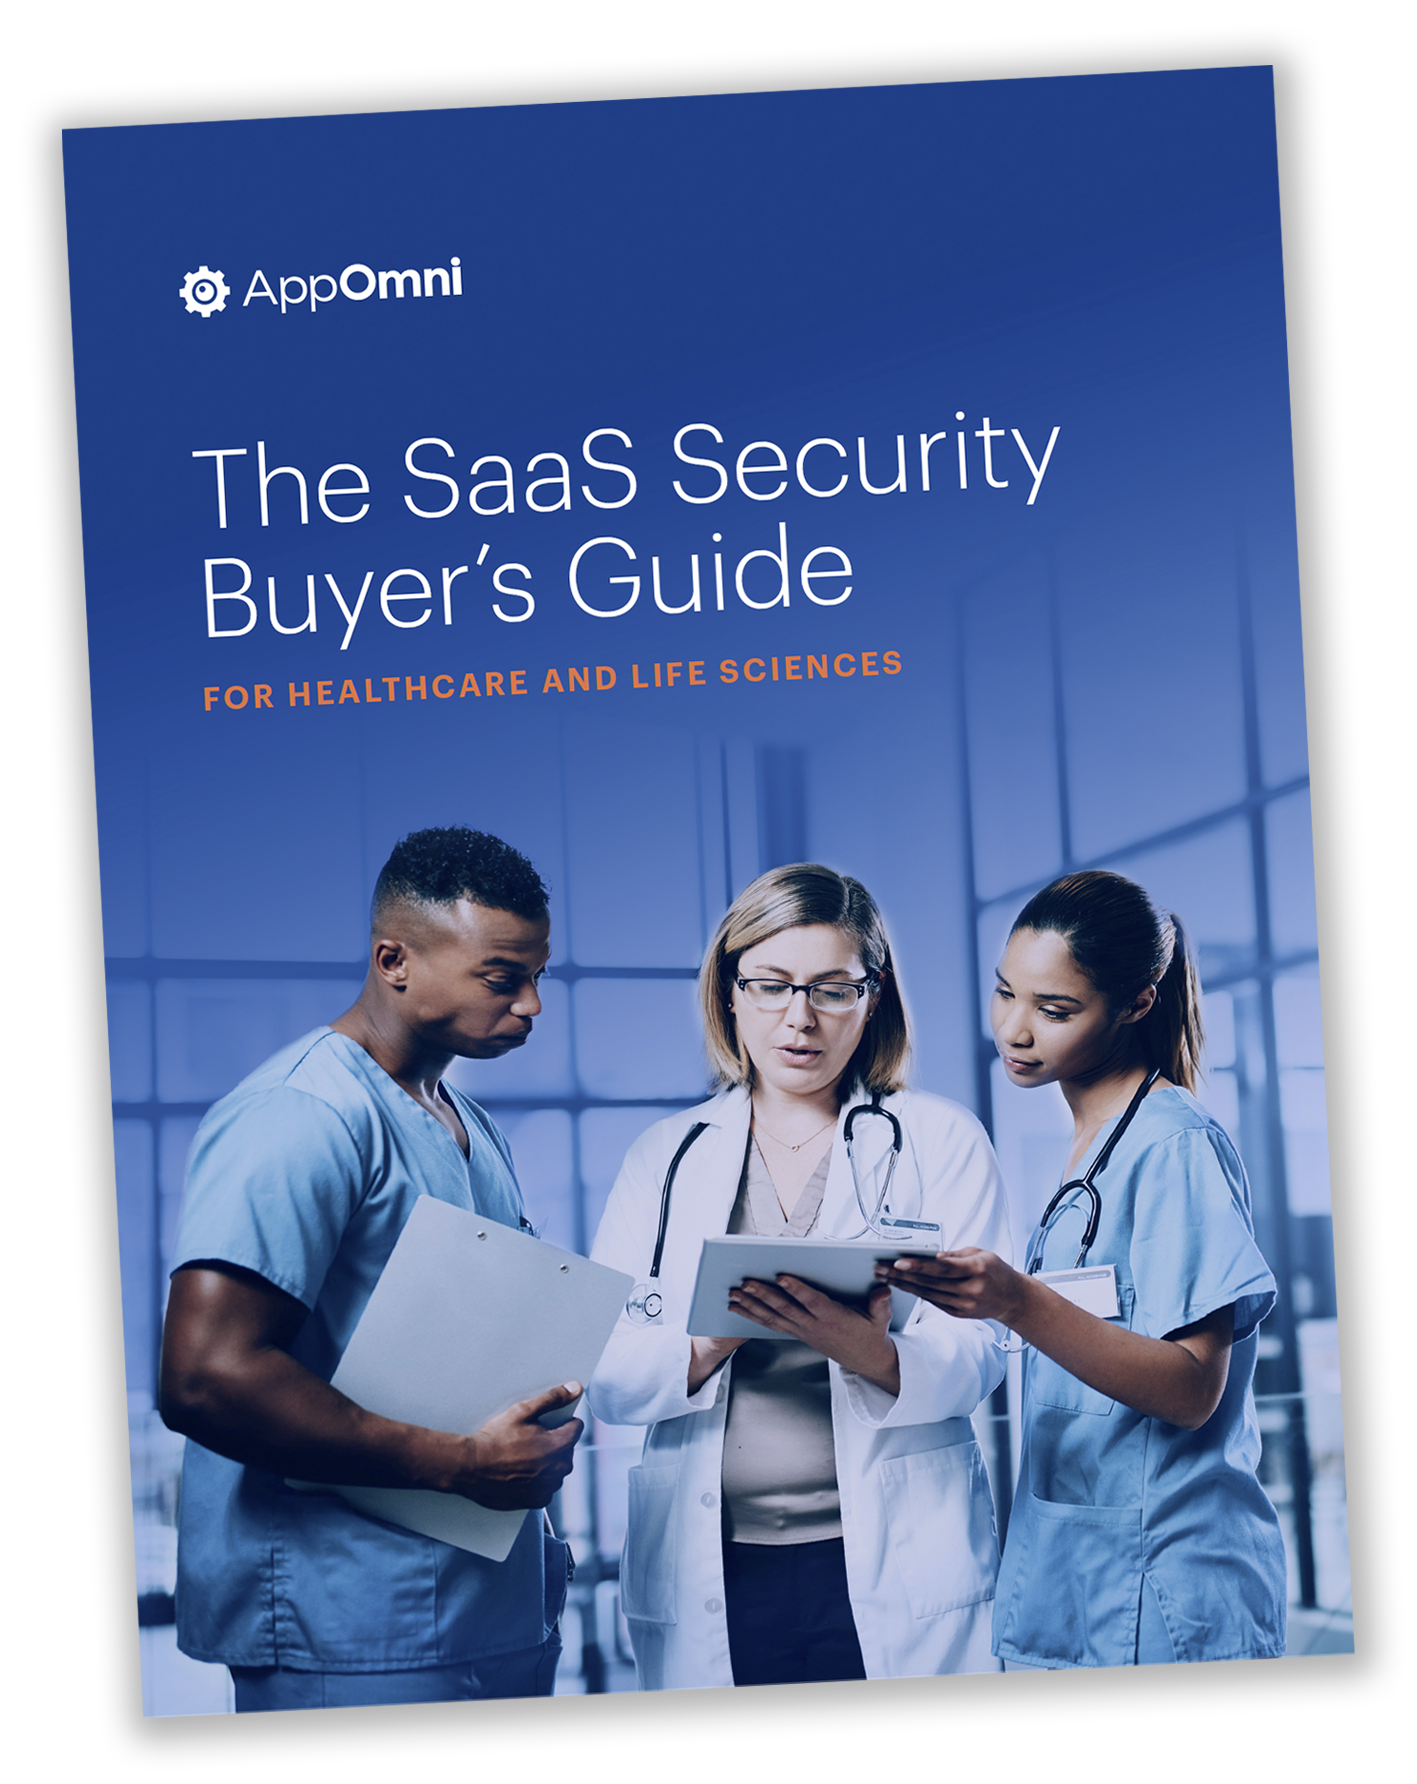 The SaaS Security Buyer’s Guide for Healthcare